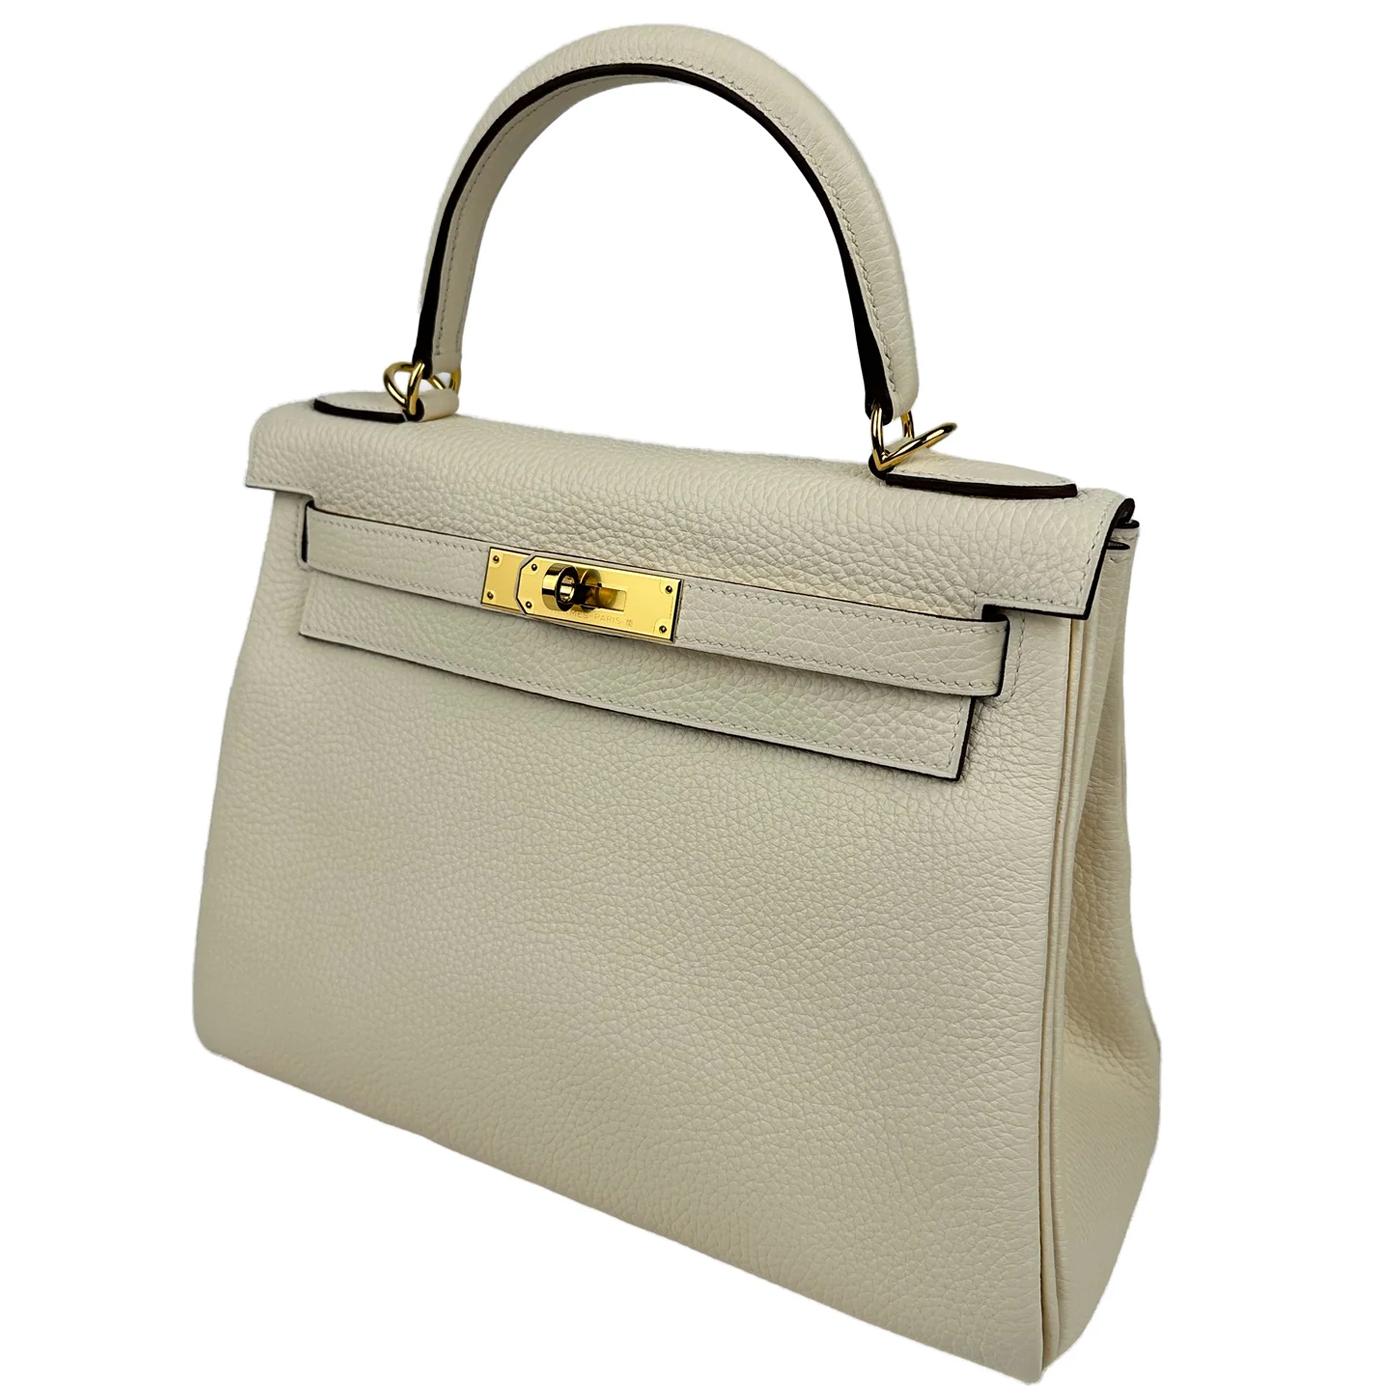 Hermes Kelly 28 Nata Togo Leather Retourne Gold Hardware Bag In New Condition For Sale In Aventura, FL